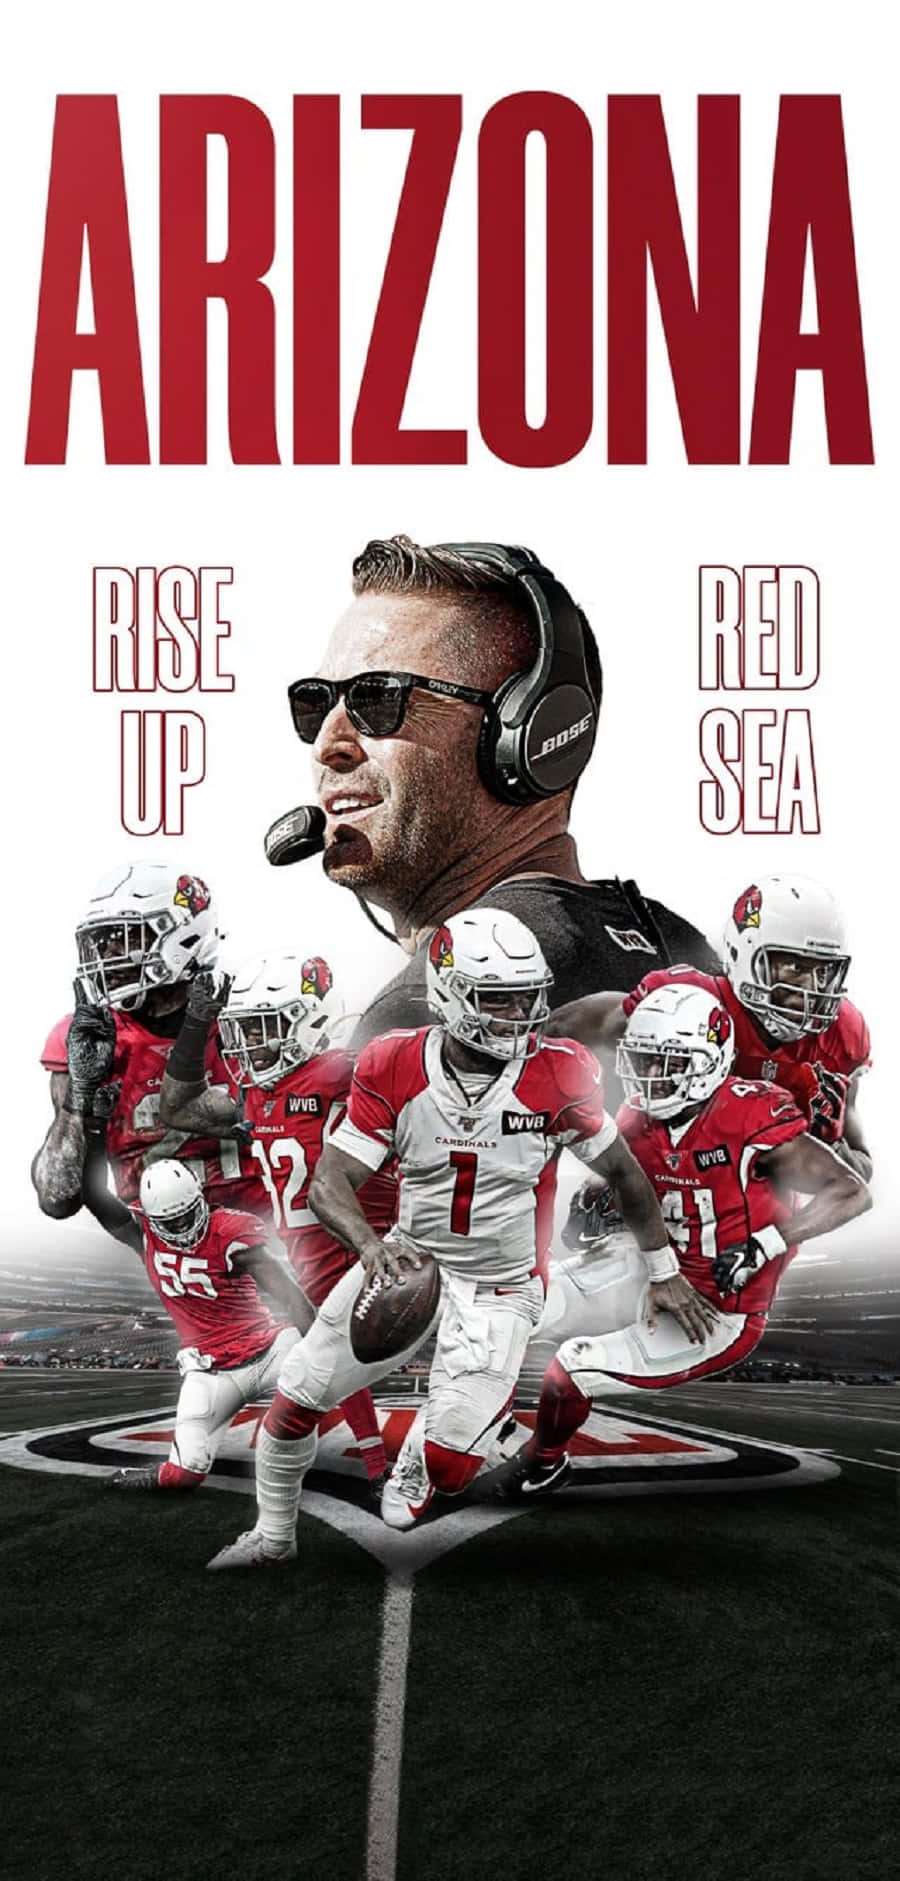 Arizona Cardinals Rise Up Red Sea Promotional Graphic